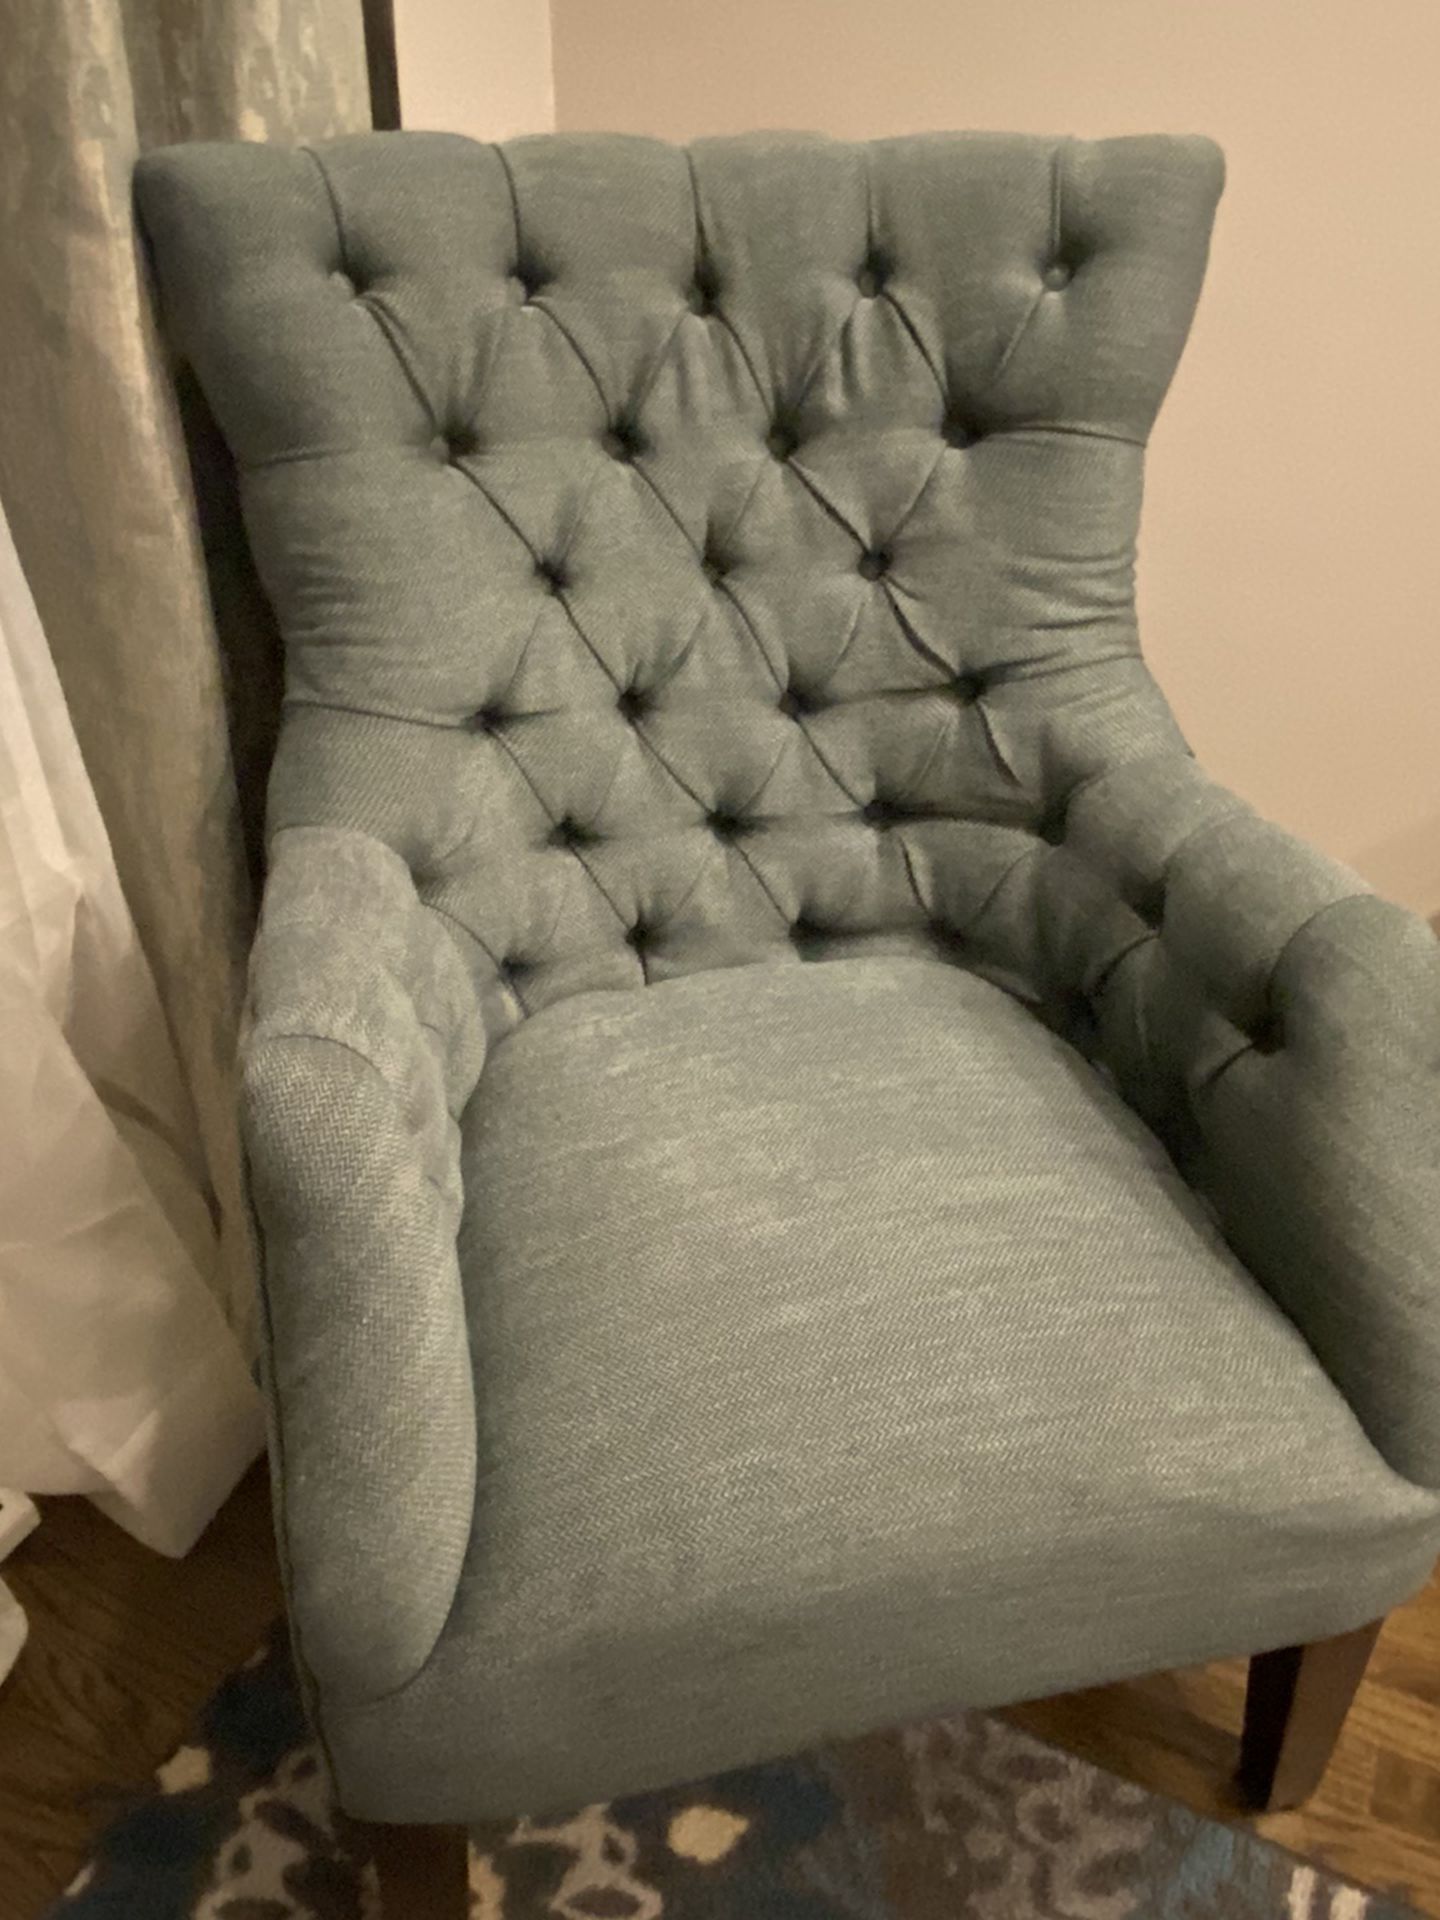 2 Teal Wingback Chairs (Brand New)